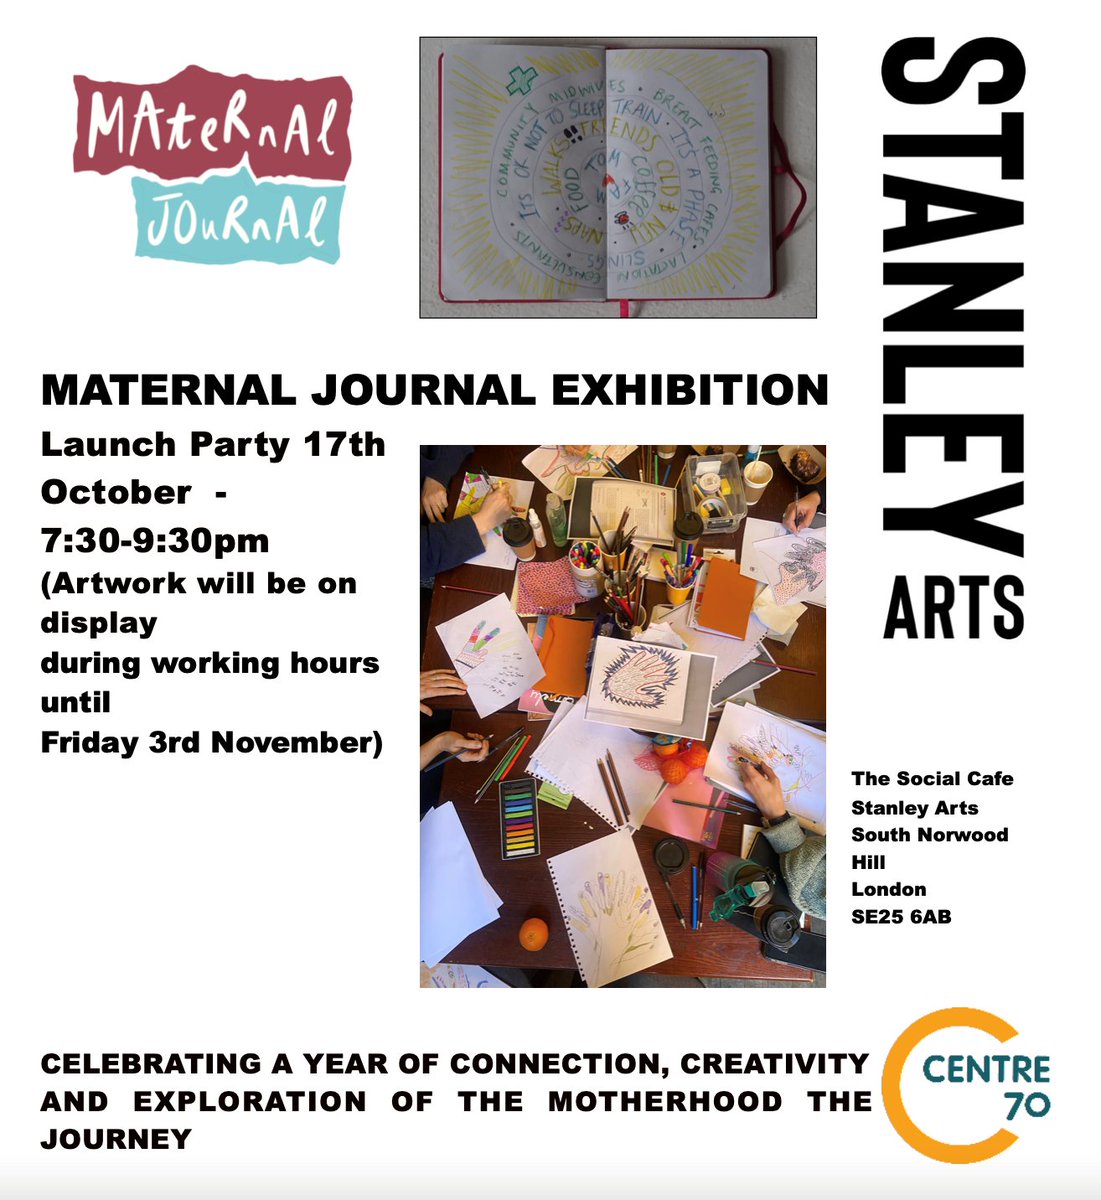 To celebrate 1 year of wonderful Maternal Journal groups we have an exhibition of journaling work at Stanley Halls on Tuesday 17th October Still time to help fund the exhibition here: gofundme.com/f/maternal-jou…